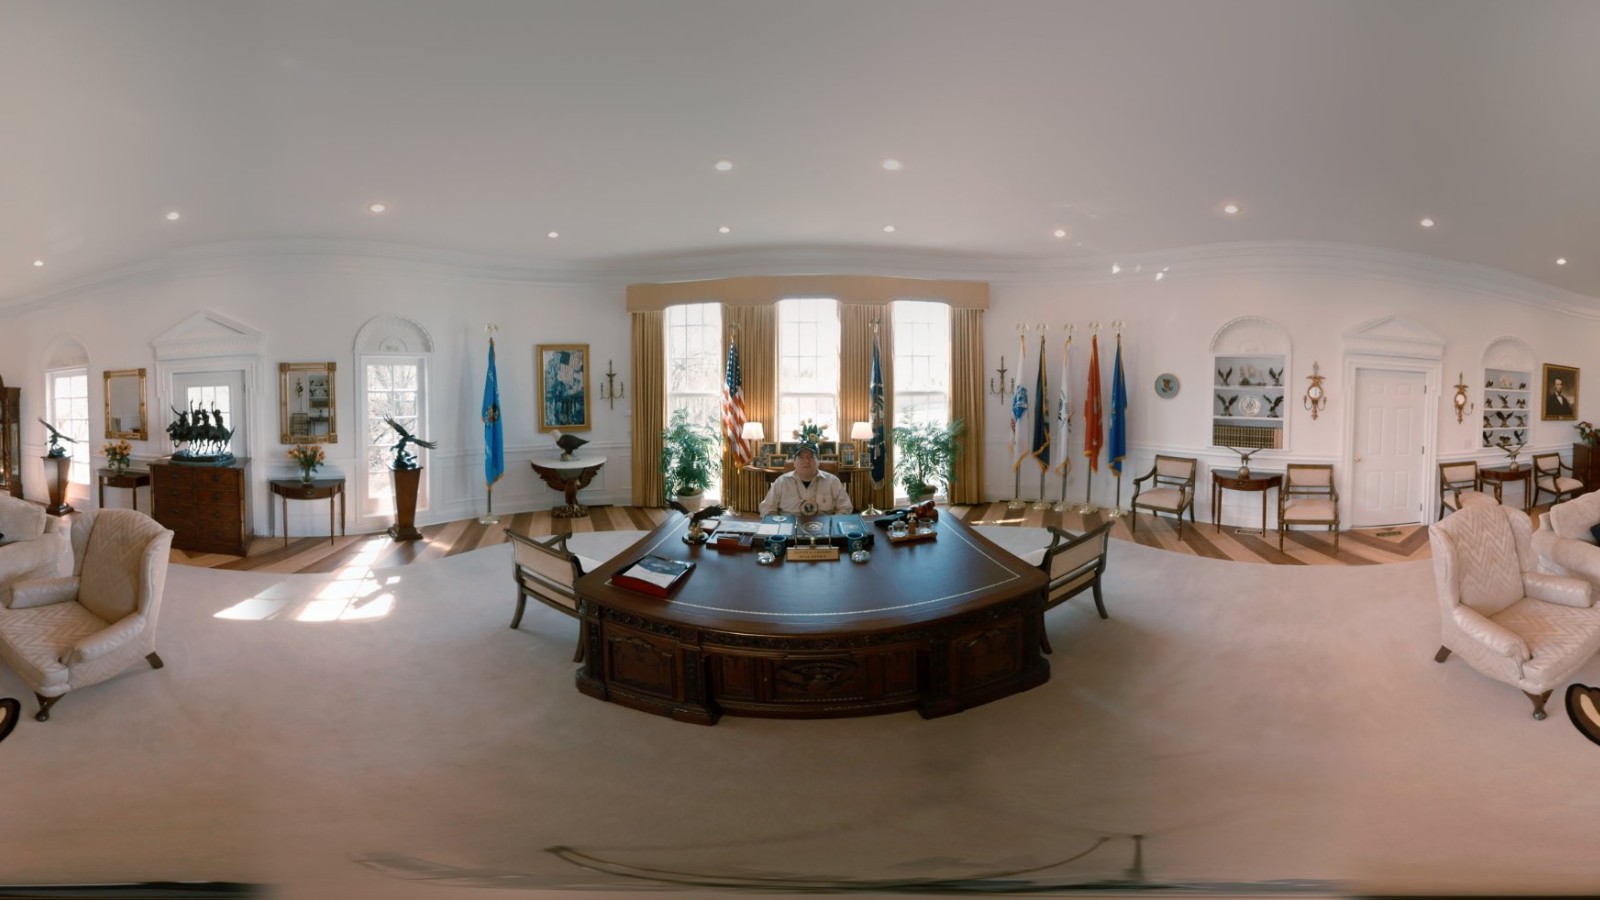 The Other Oval Office Cnn